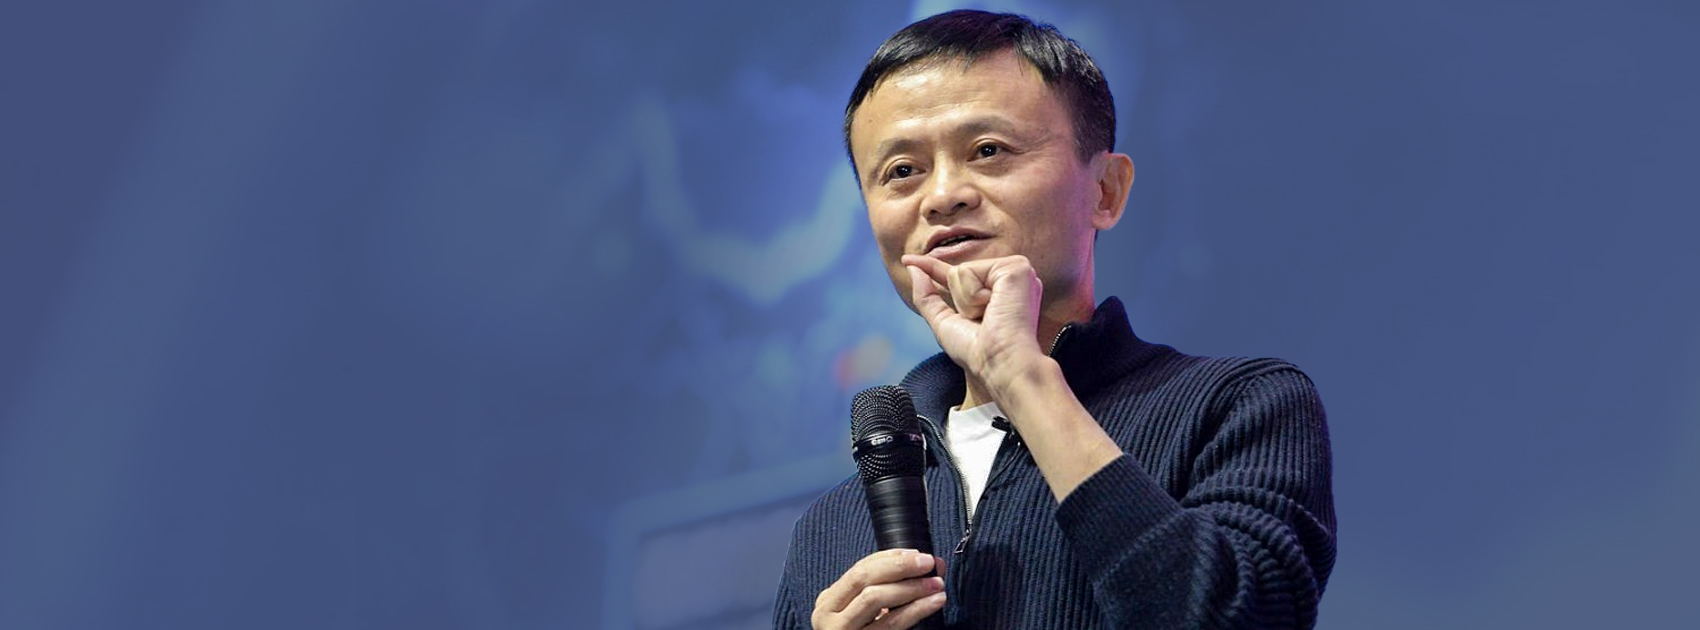 Jack Ma Most Inspiring Quotes,Startup Stories,10 Greatest Quotes from Jack Ma, 10 Inspiring Quotes By Jack Ma, Alibaba Group Co Founder, Alibaba Group Co Founder Inspiring Quotes, Jack Ma Most Inspiring Quotes, Jack Ma motivational quotes, Jack Ma Quotes, Inspirational Success Quotes 2019, startup stories